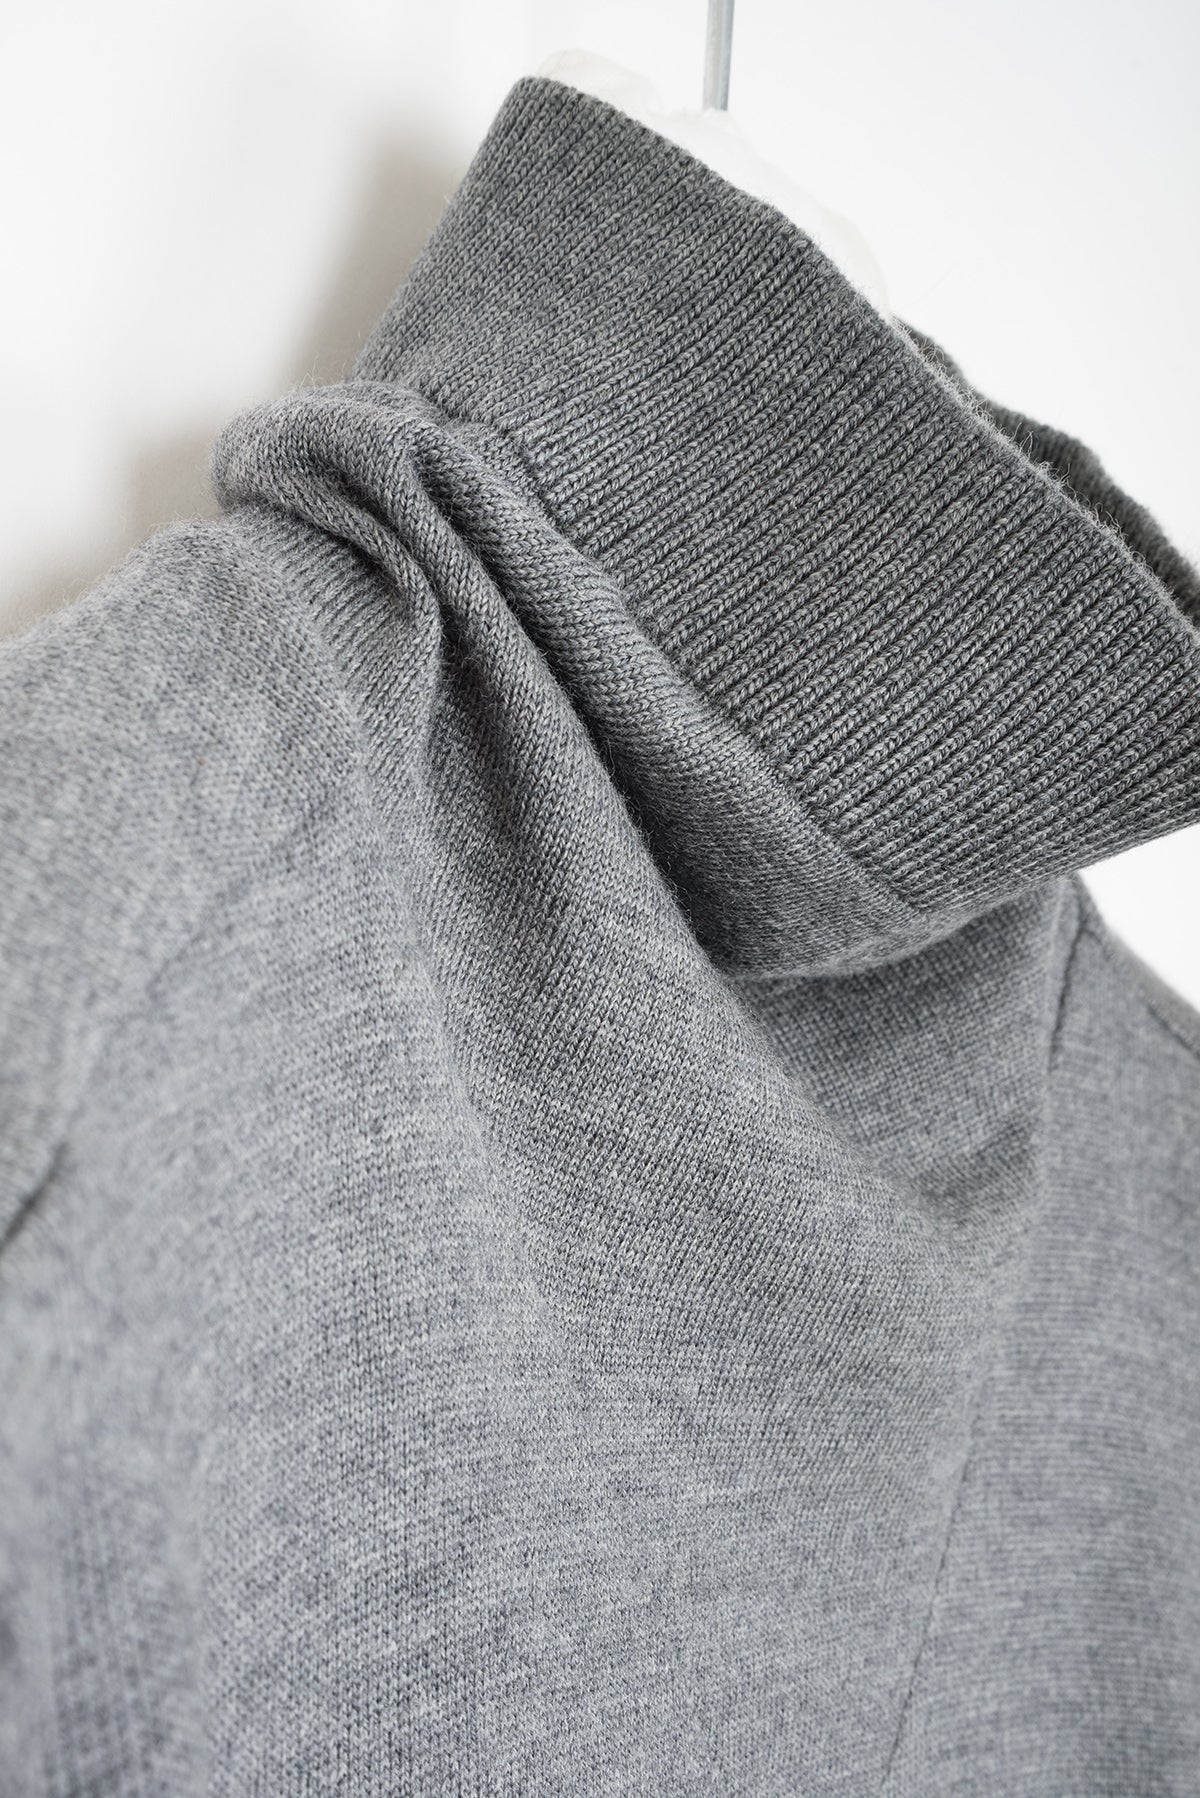 2007 A/W HIGHNECK SWEATER WITH FRONT CHEST POCKET